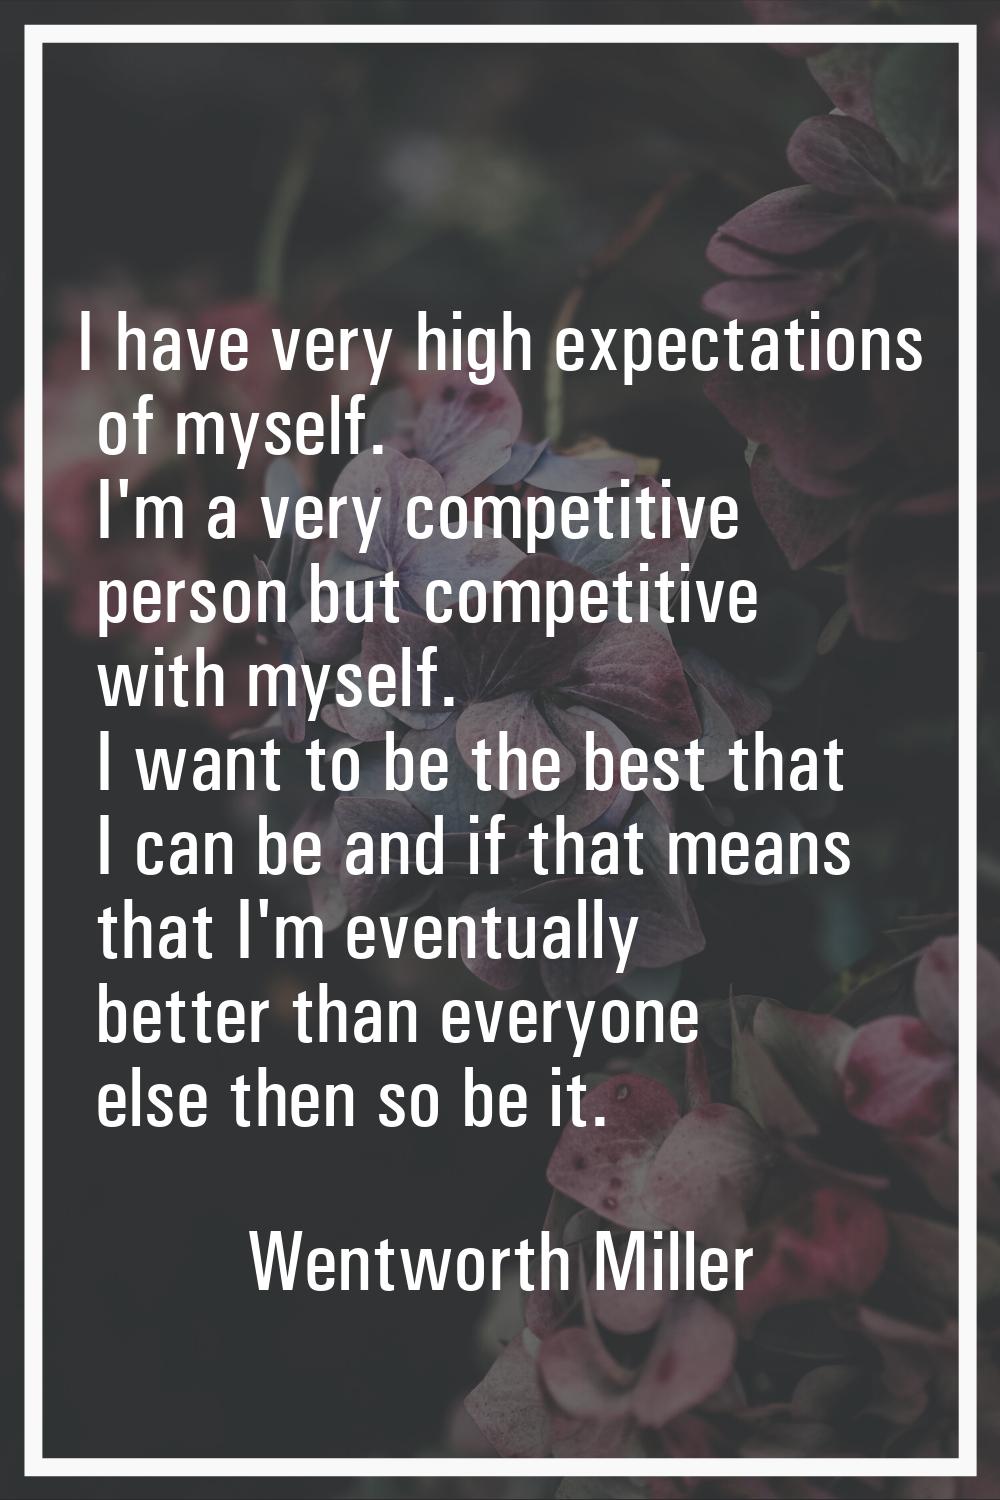 I have very high expectations of myself. I'm a very competitive person but competitive with myself.